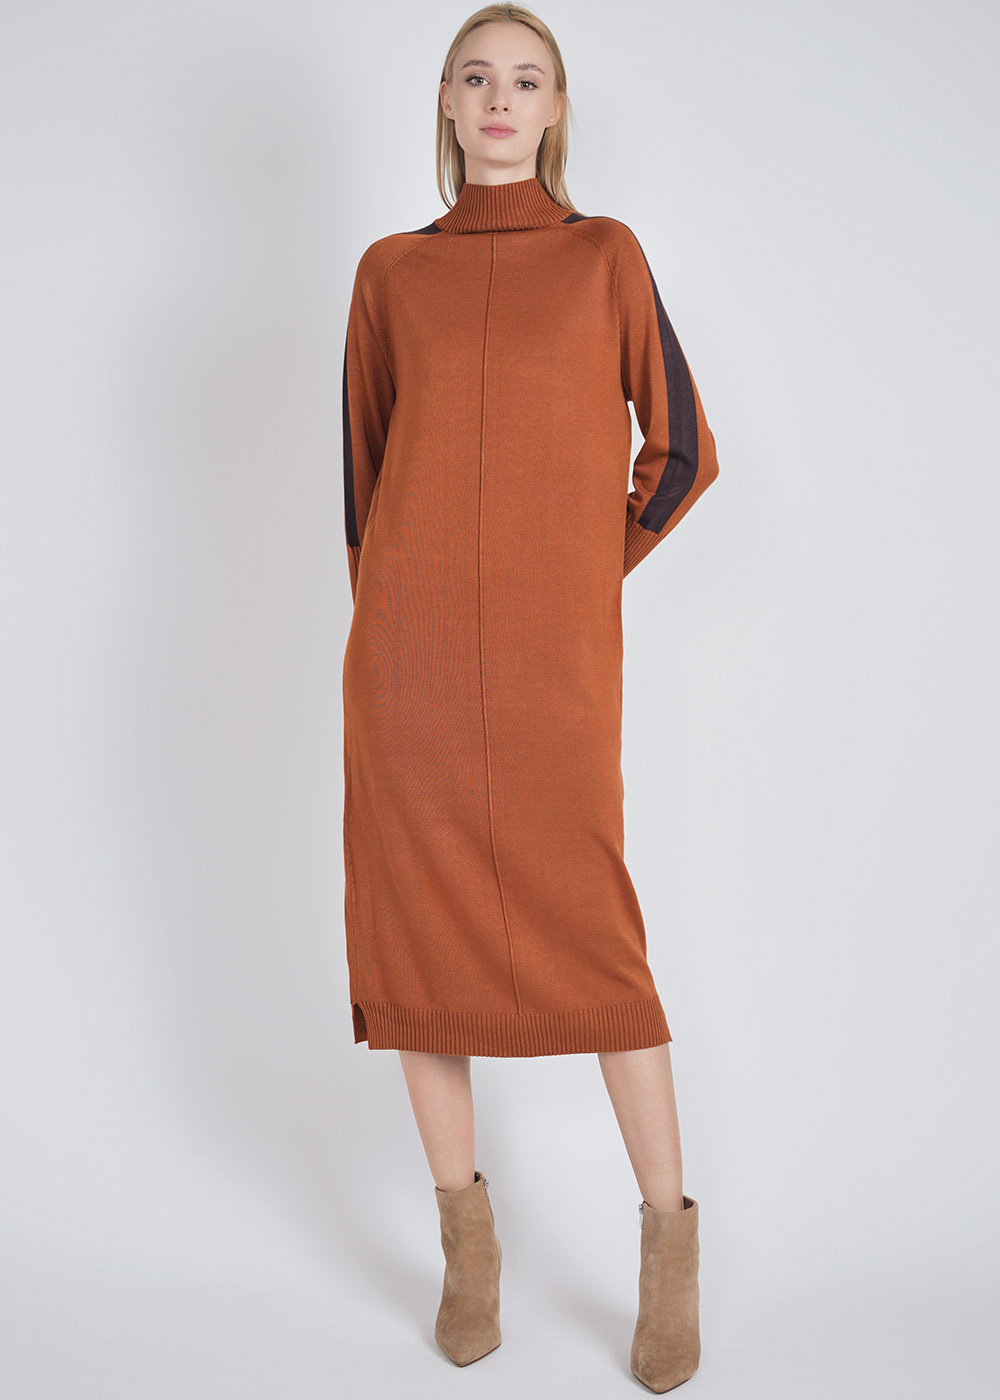 Sophisticated Rust Dress: High Neck & Striped Arms